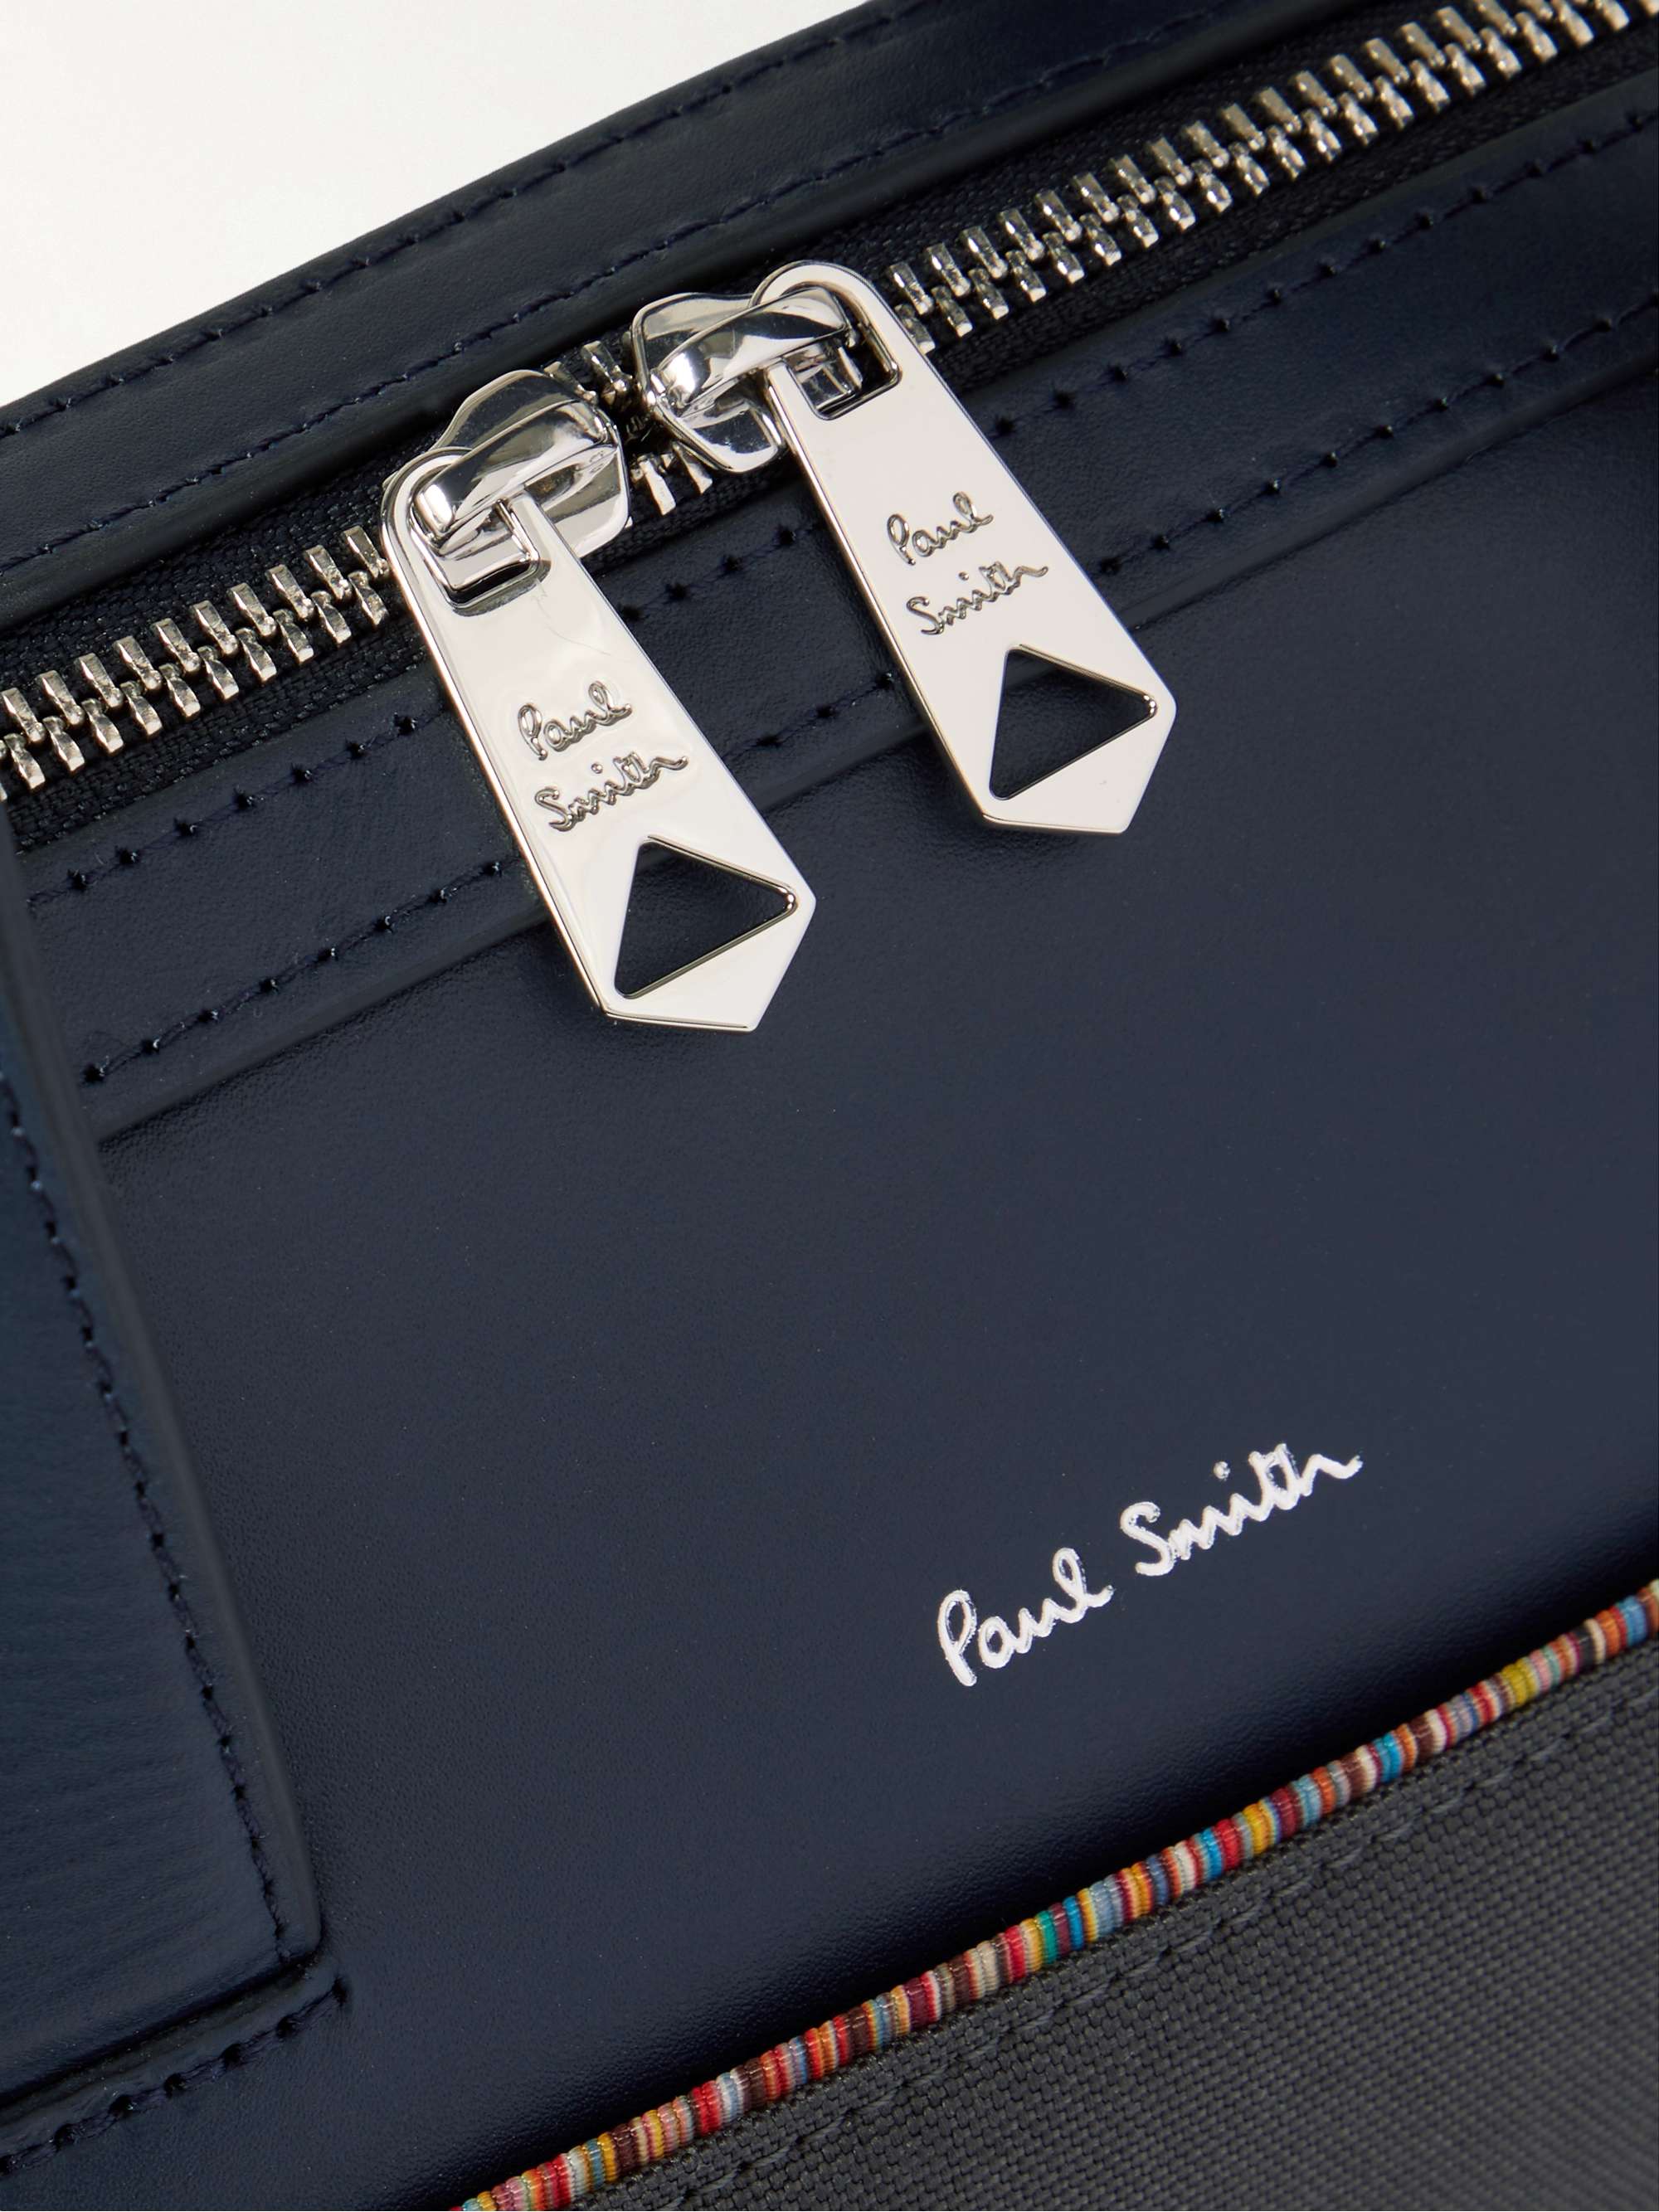 PAUL SMITH Leather-Trimmed Canvas Briefcase